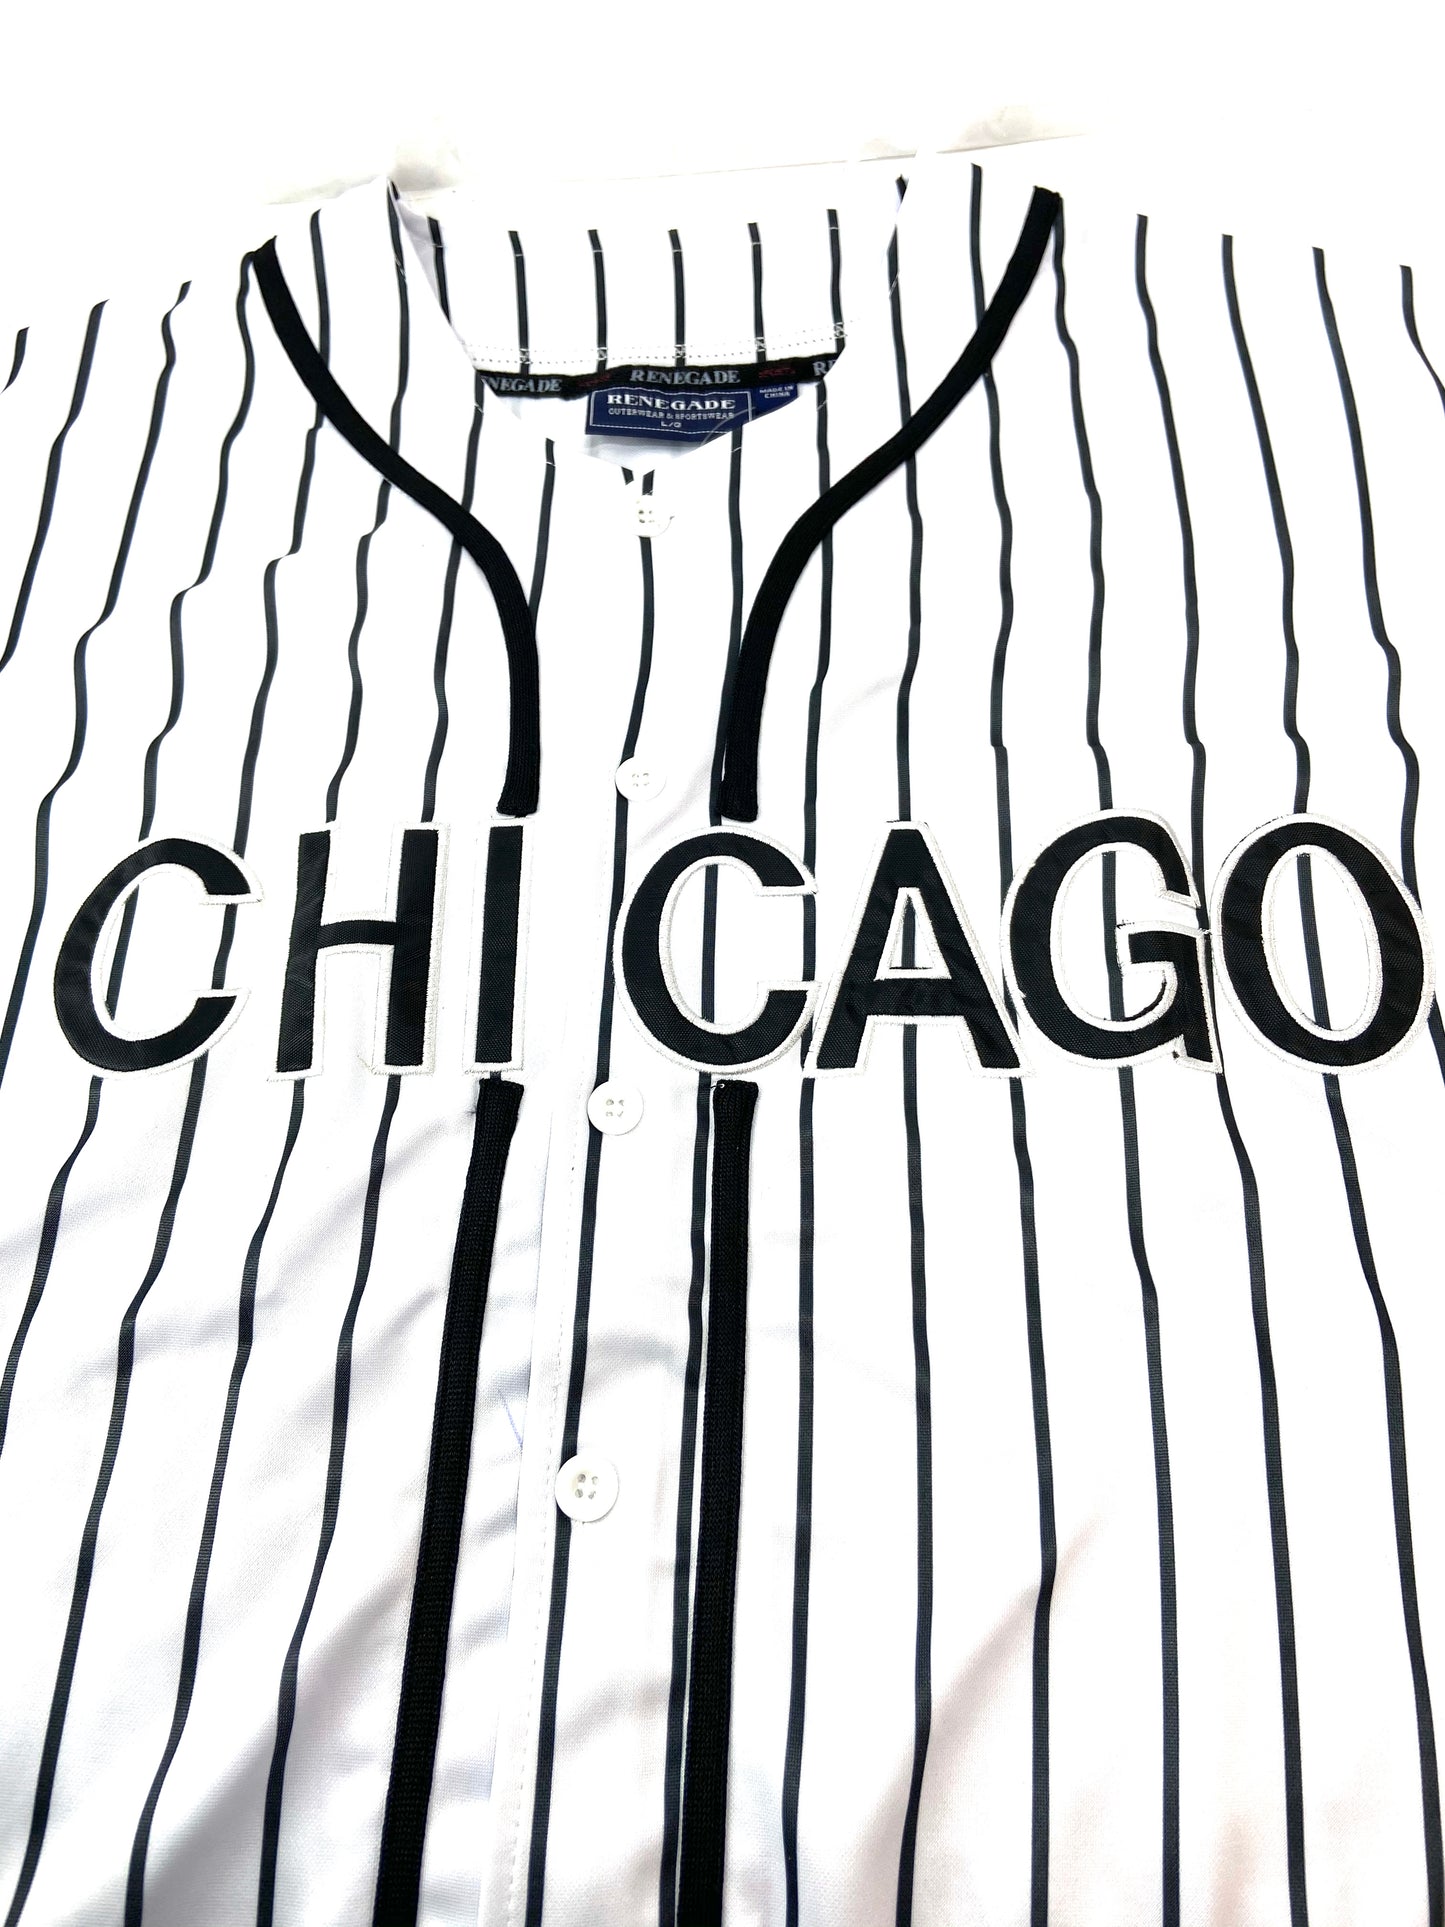 Chicago Vintage UNLICENSED MLB Replica Jersey by Renegade Outerwear